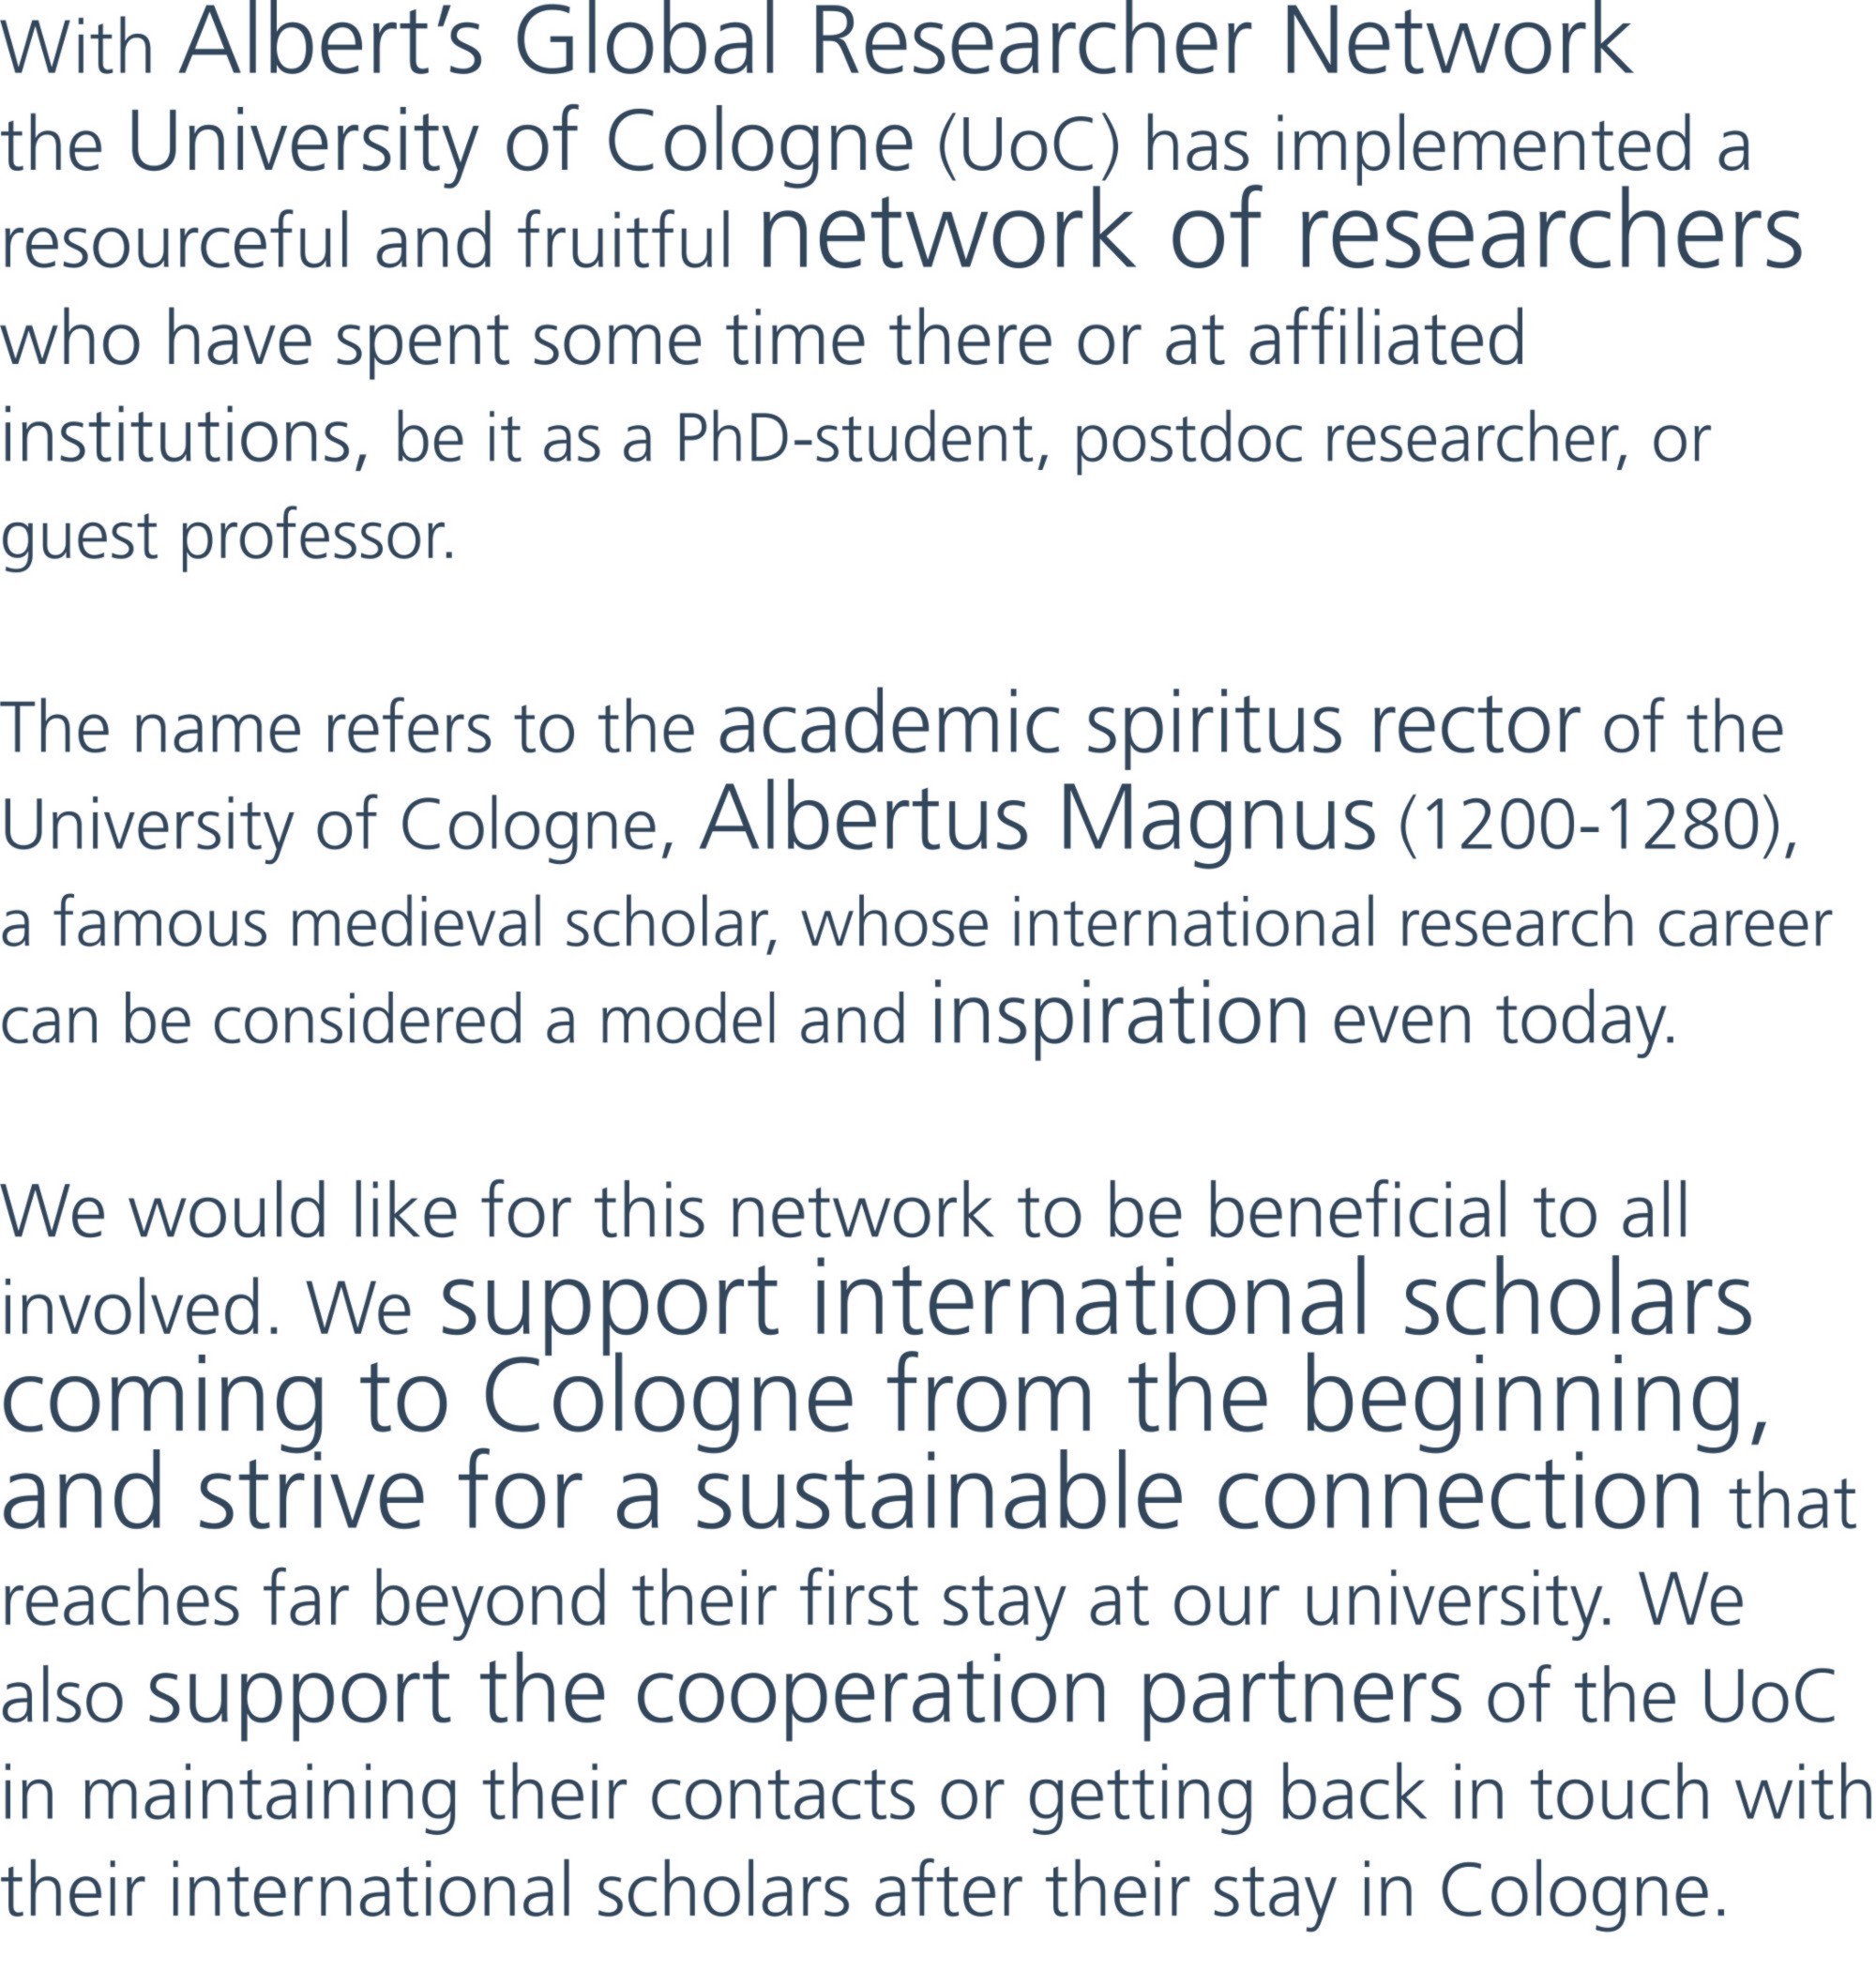 With Albert’s Global Researcher Network the University of Cologne (UoC) has implemented a resourceful and fruitful network of researchers who have spent some time there or at affiliated institutions, be it as a PhD-student, postdoc researcher, or guest professor. The name refers to the academic spiritus rector of the University of Cologne, Albertus Magnus (1200-1280), a famous medieval scholar, whose international research career can be considered a model and inspiration even today. We would like for this network to be beneficial to all involved. We support international scholars coming to Cologne from the beginning, and strive for a sustainable connection that reaches far beyond their first stay at our university. We also support the cooperation partners of the UoC in maintaining their contacts or getting back in touch with their international scholars after their stay in Cologne. 